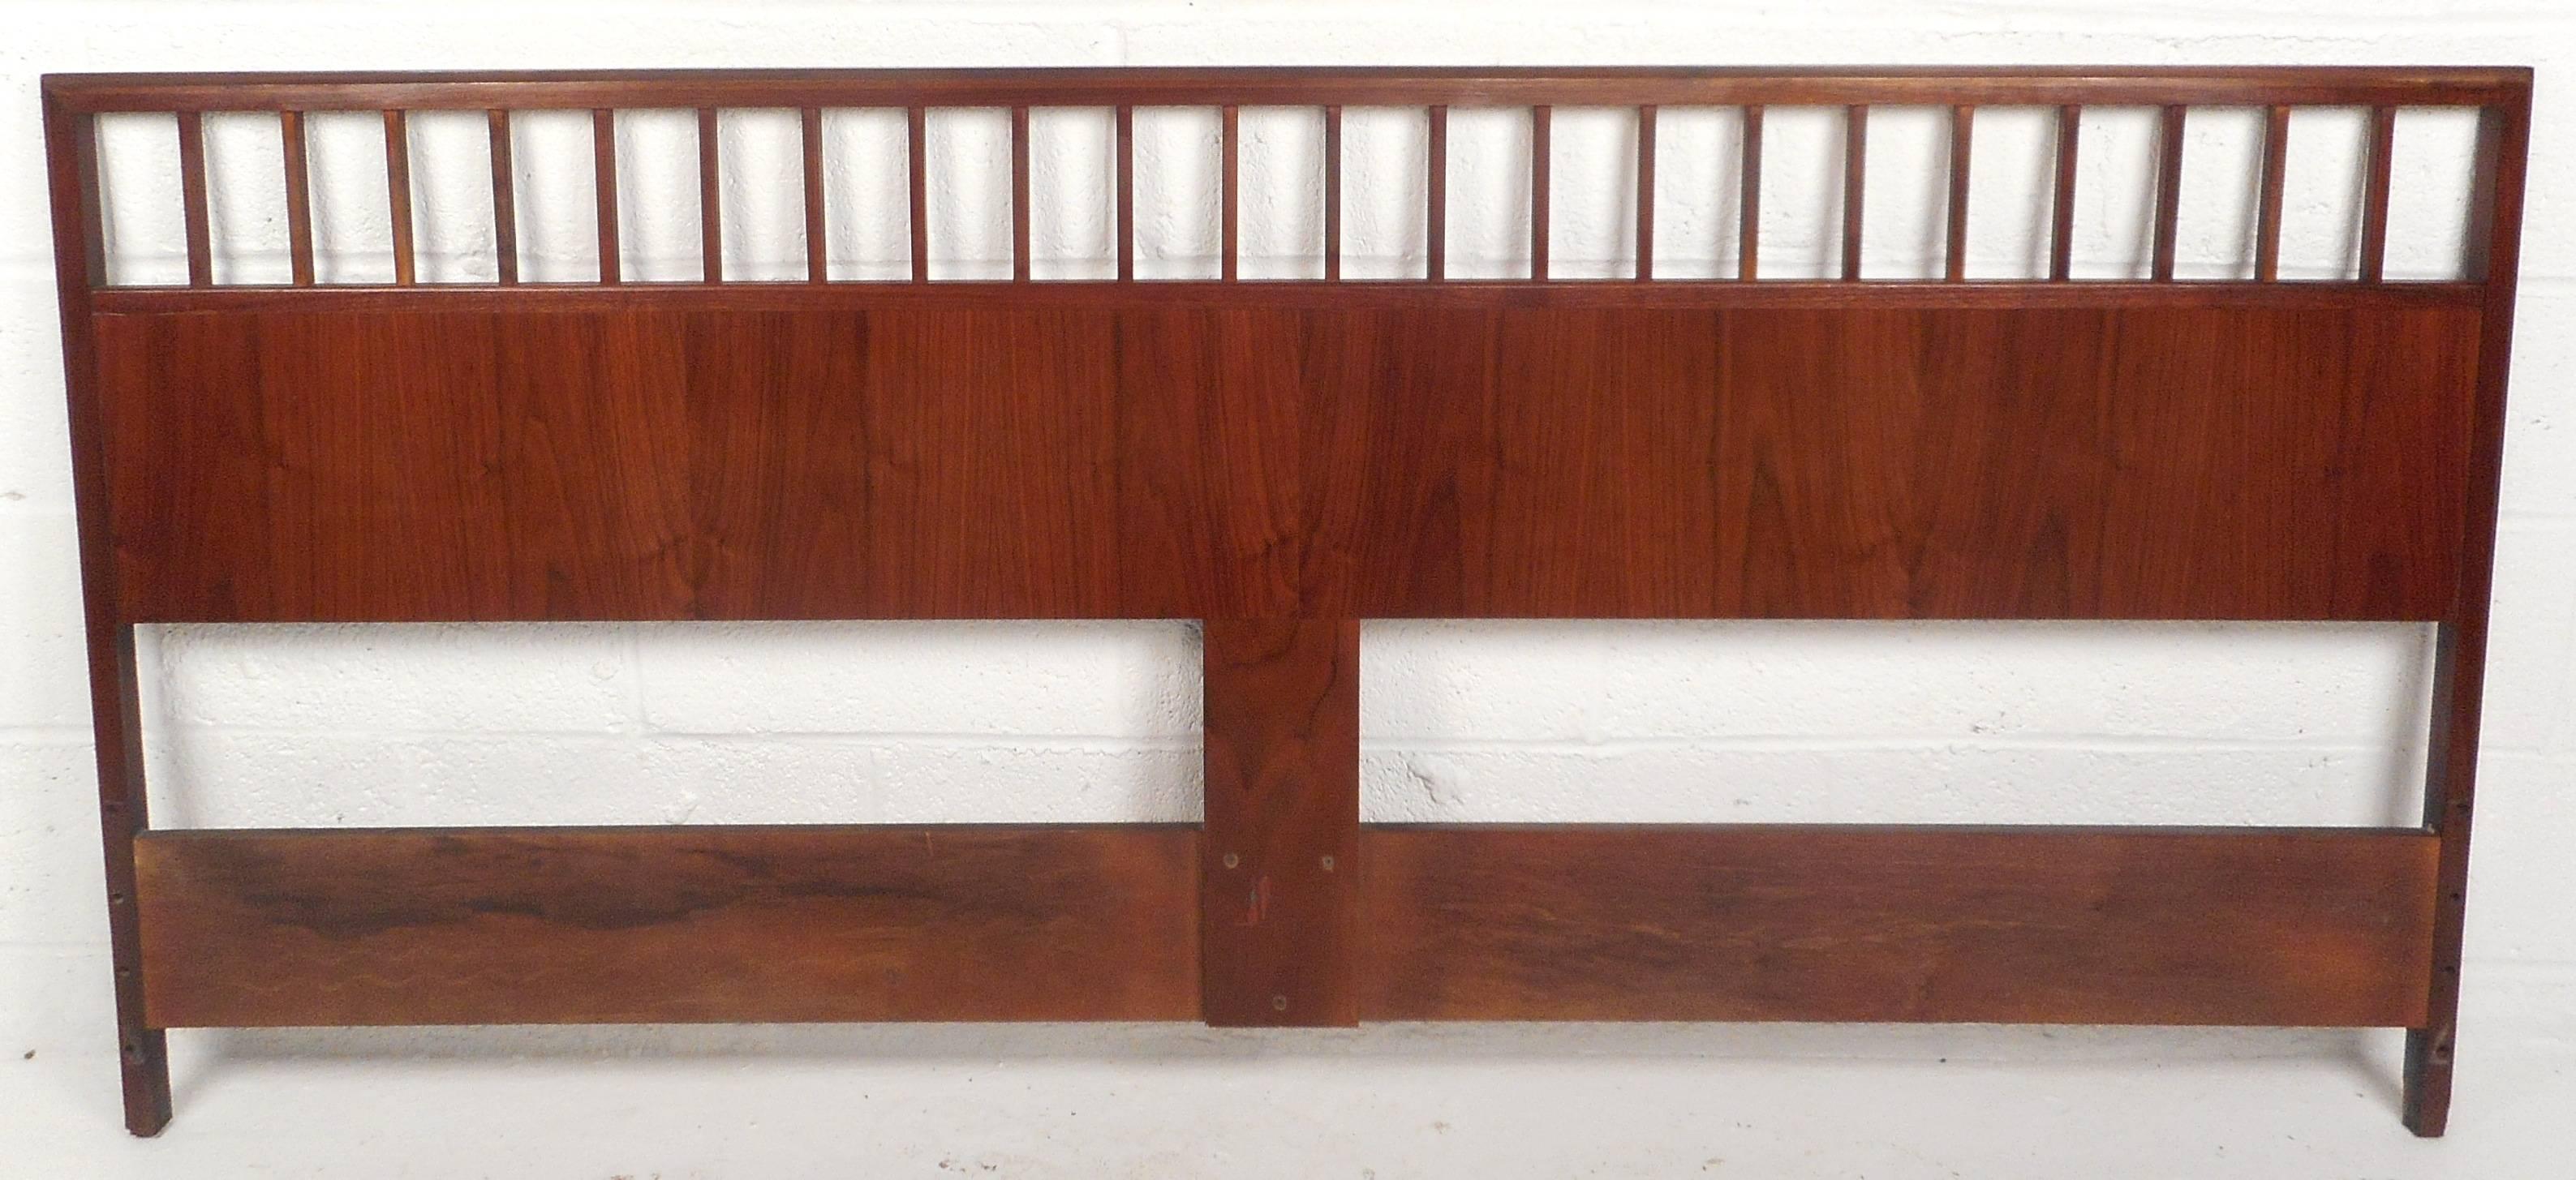 This impressive vintage modern headboard features beautiful walnut wood grain and a unique spoke design top. The sturdy construction and sleek appearance make this Mid-Century piece the perfect addition to any setting. Please confirm item location